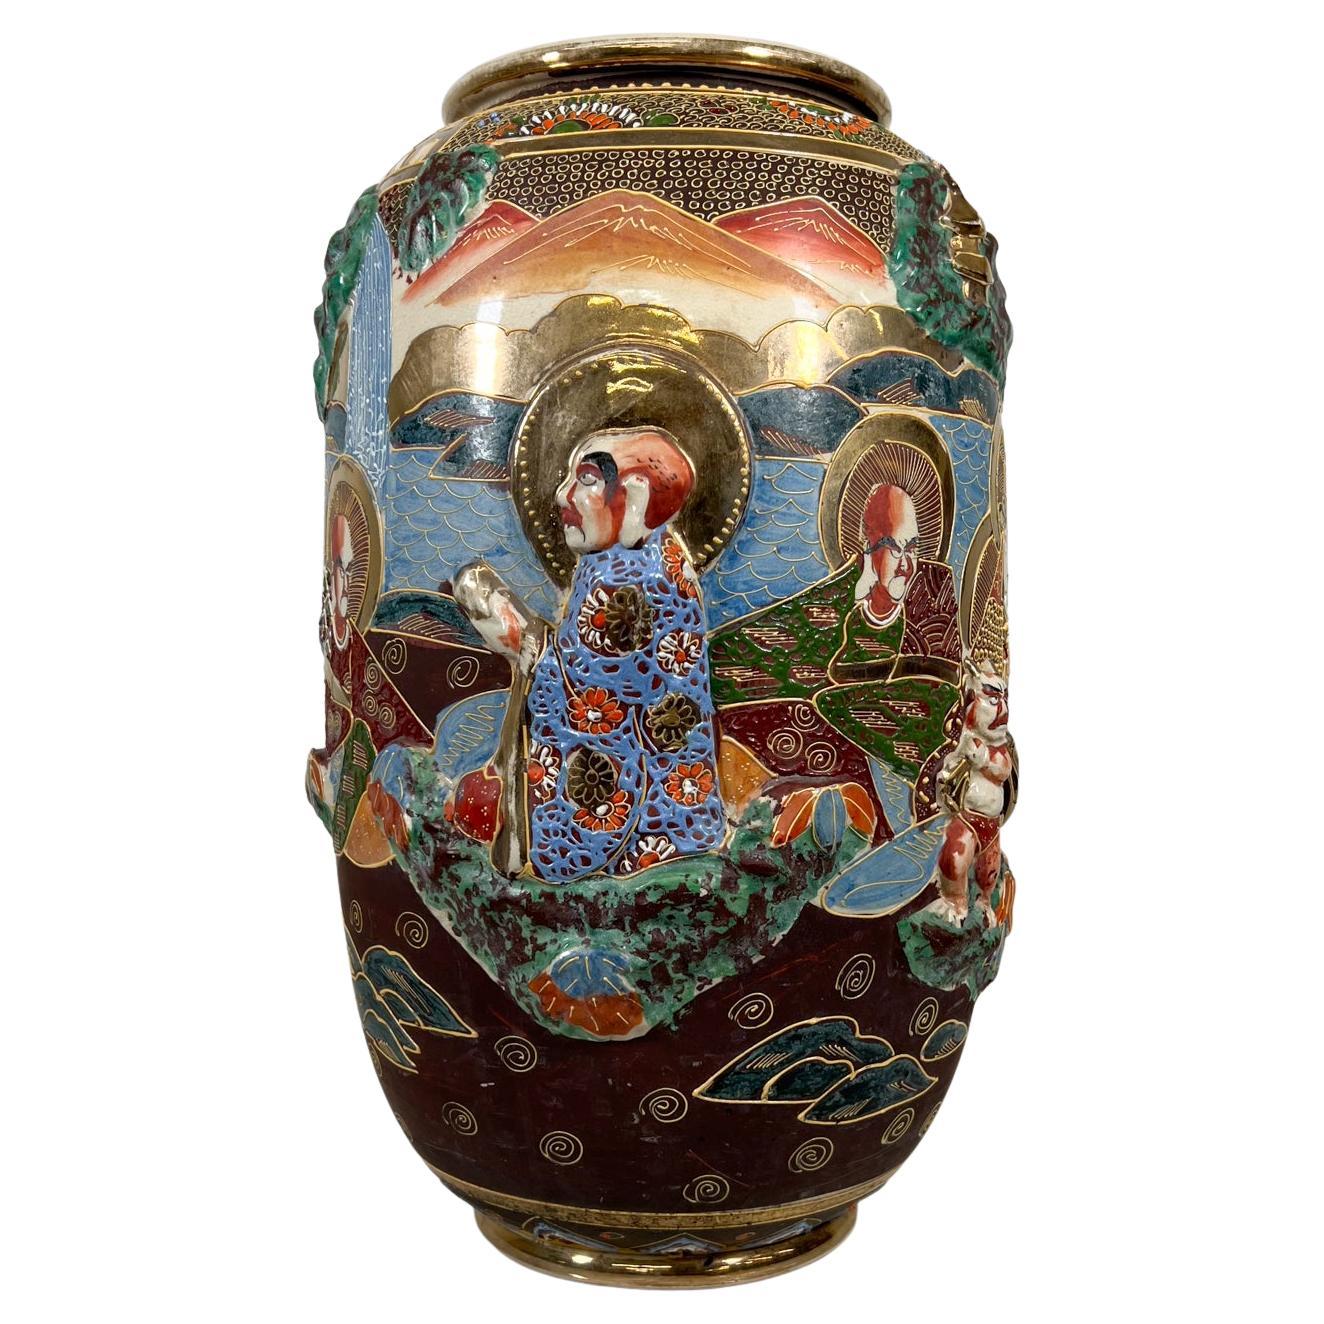 Vintage Japanese Satsuma Ceramic Vase with Colorful High Relief Decoration